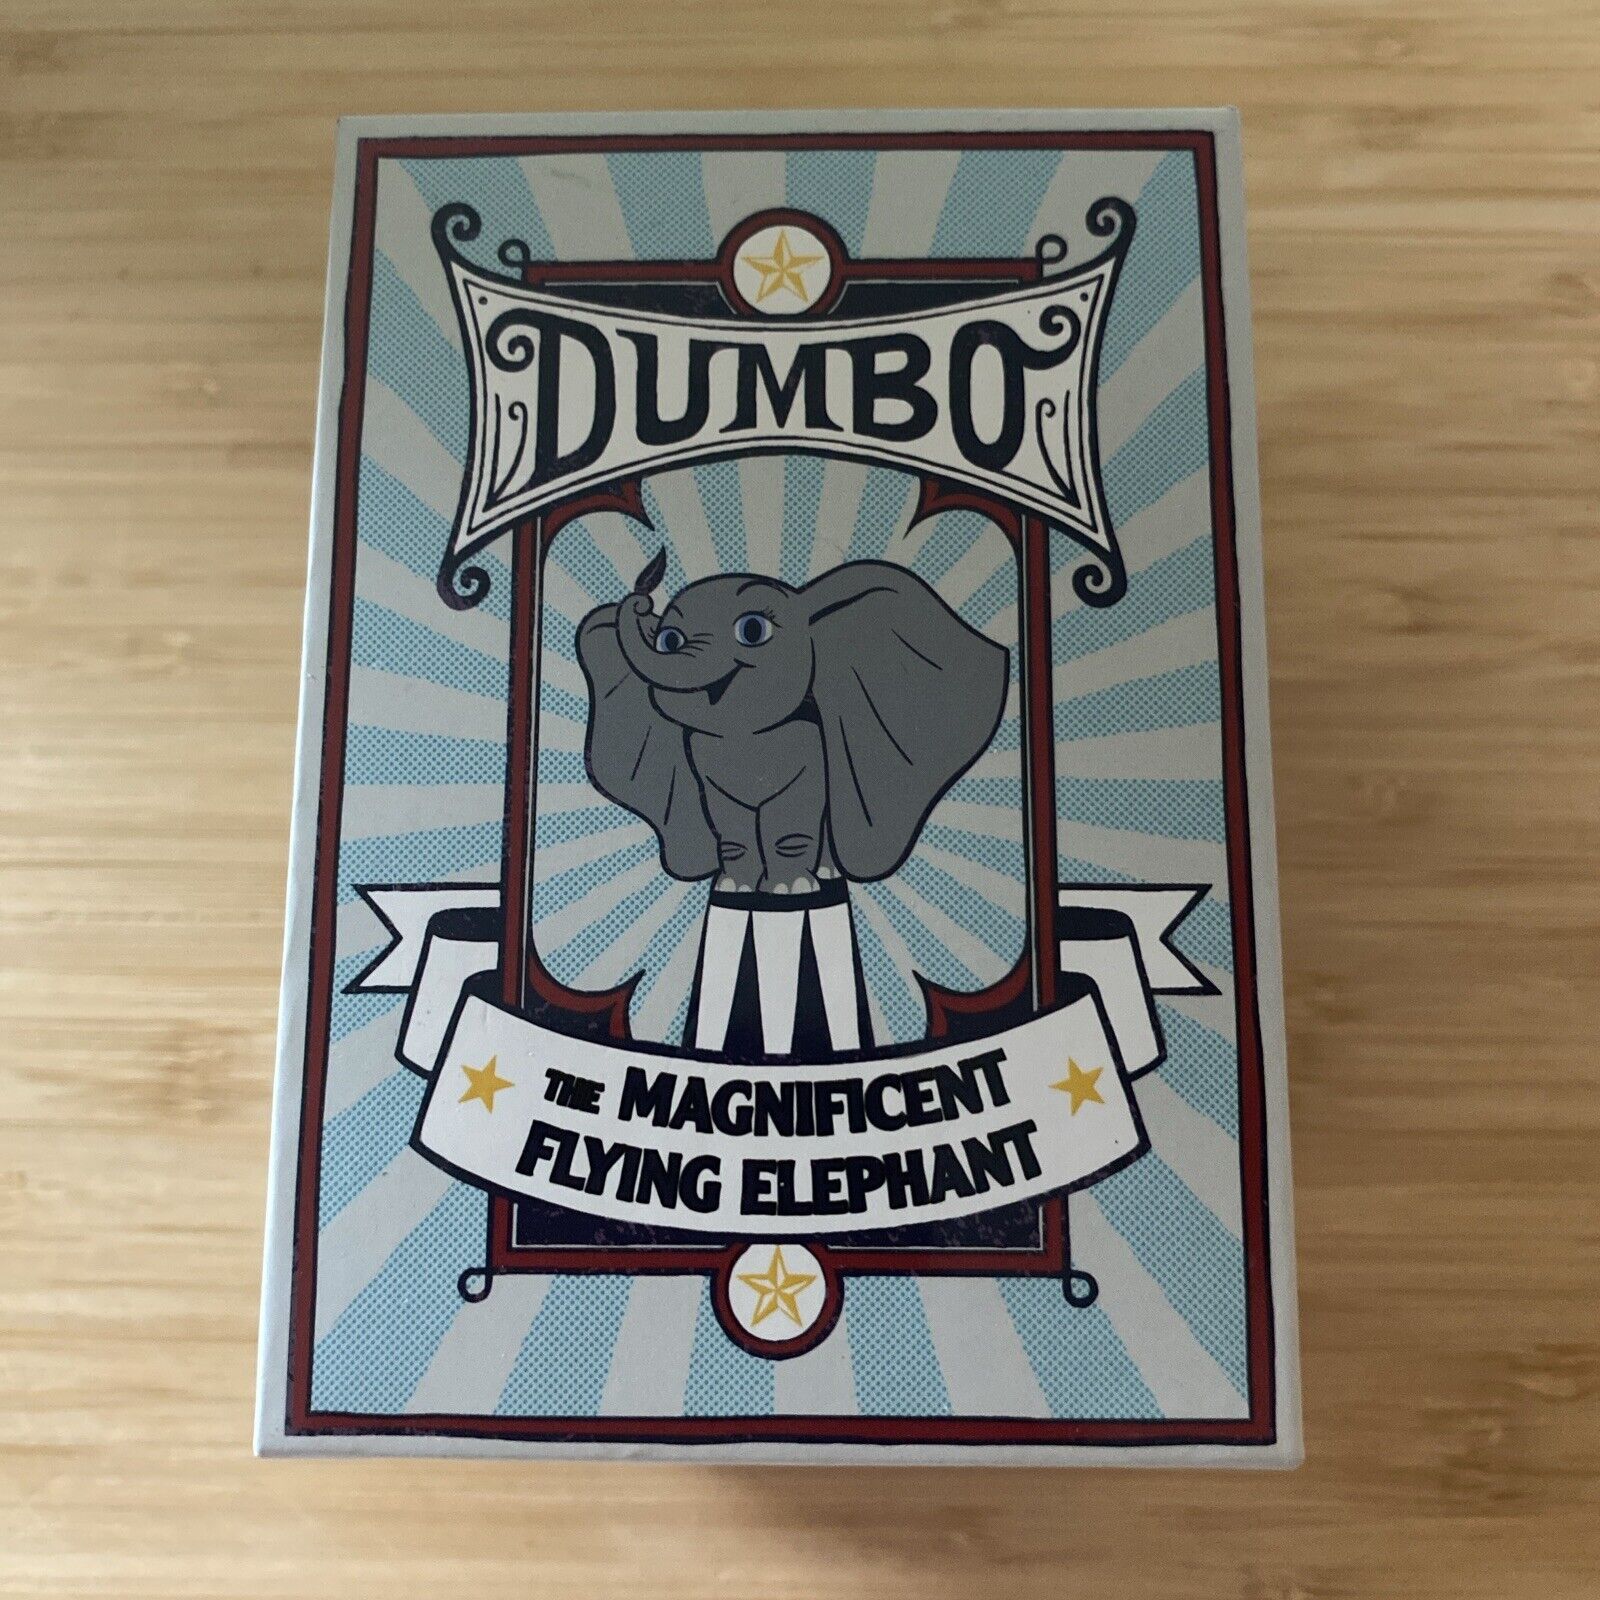 New Disney Dumbo the Magnificent Flying Elephant Magic Band Limited Edition 2000